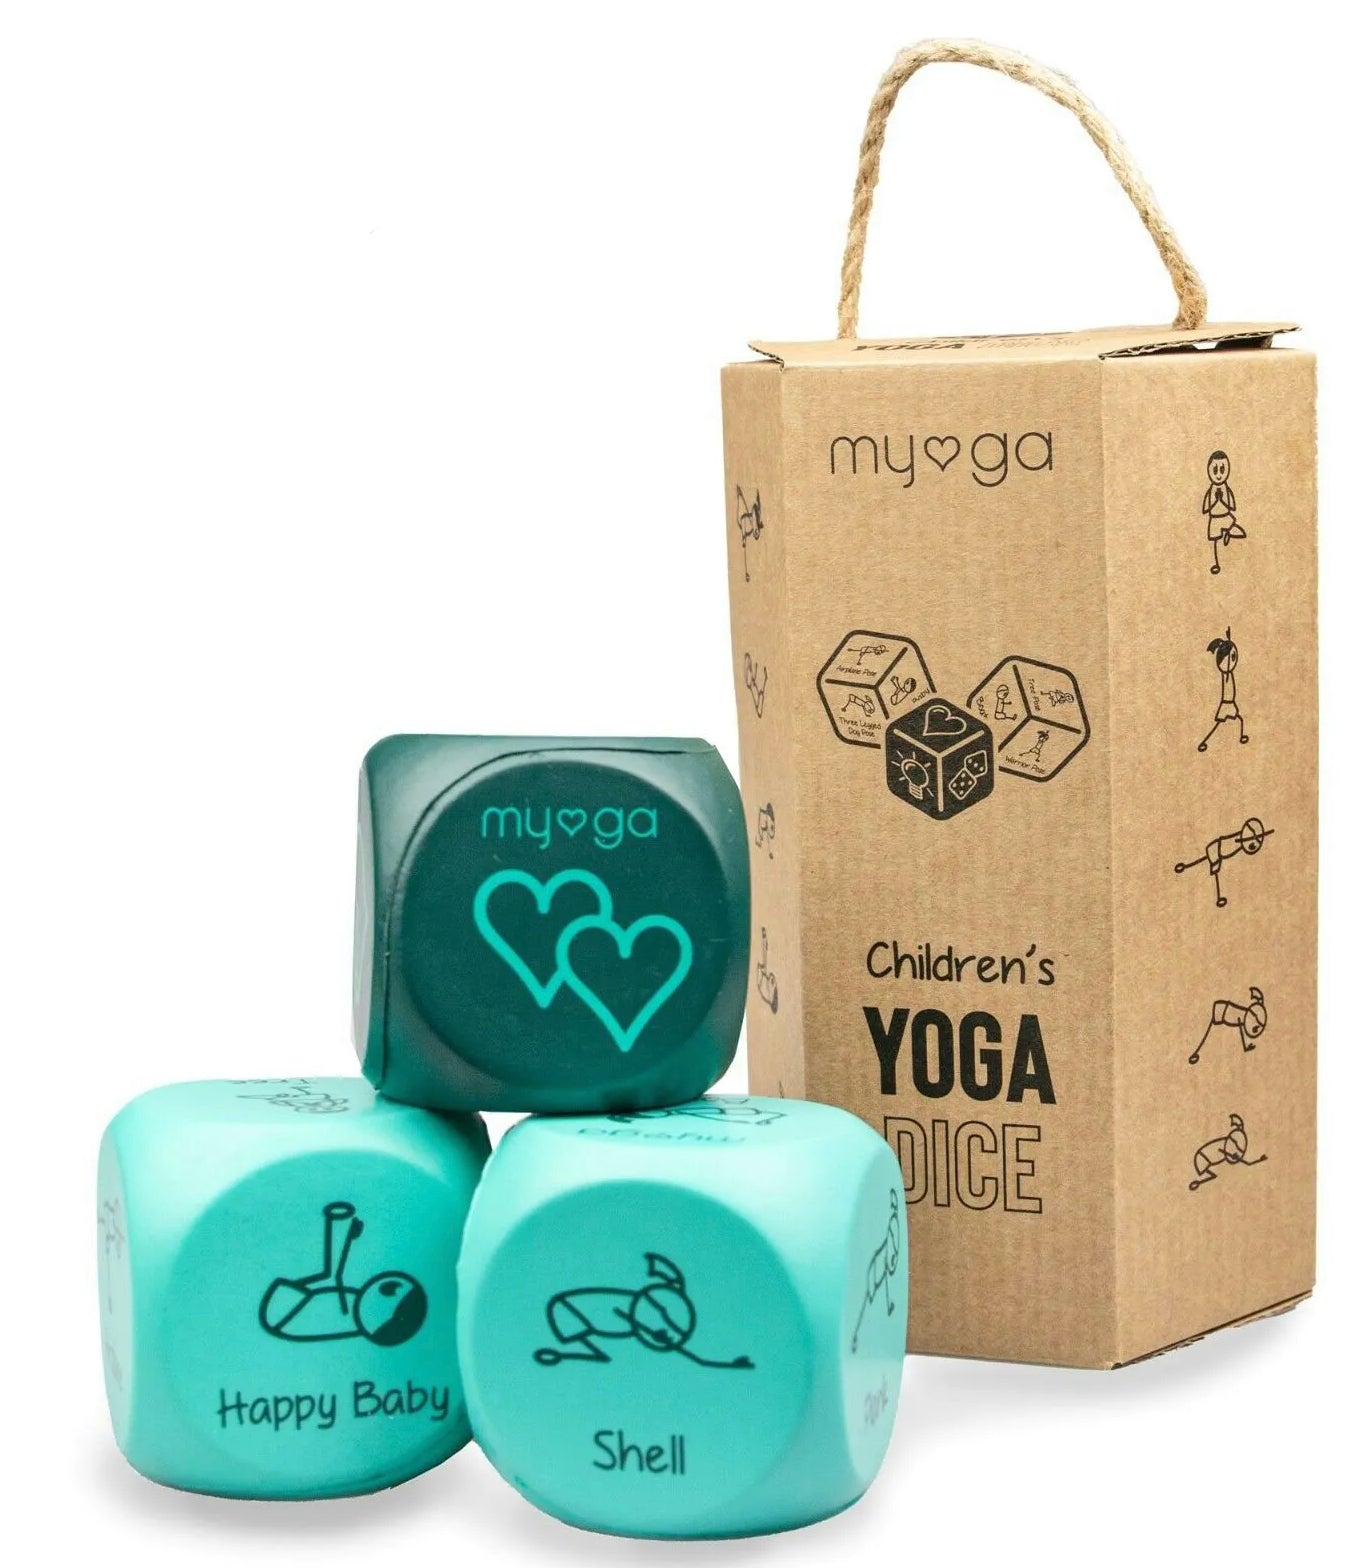 Yoga Dice, Autism Specialties, Yoga Dice from Therapy Shoppe Yoga for  Kids, Yoga Dice, Pretzels, Sensory Break, Diet, Toy